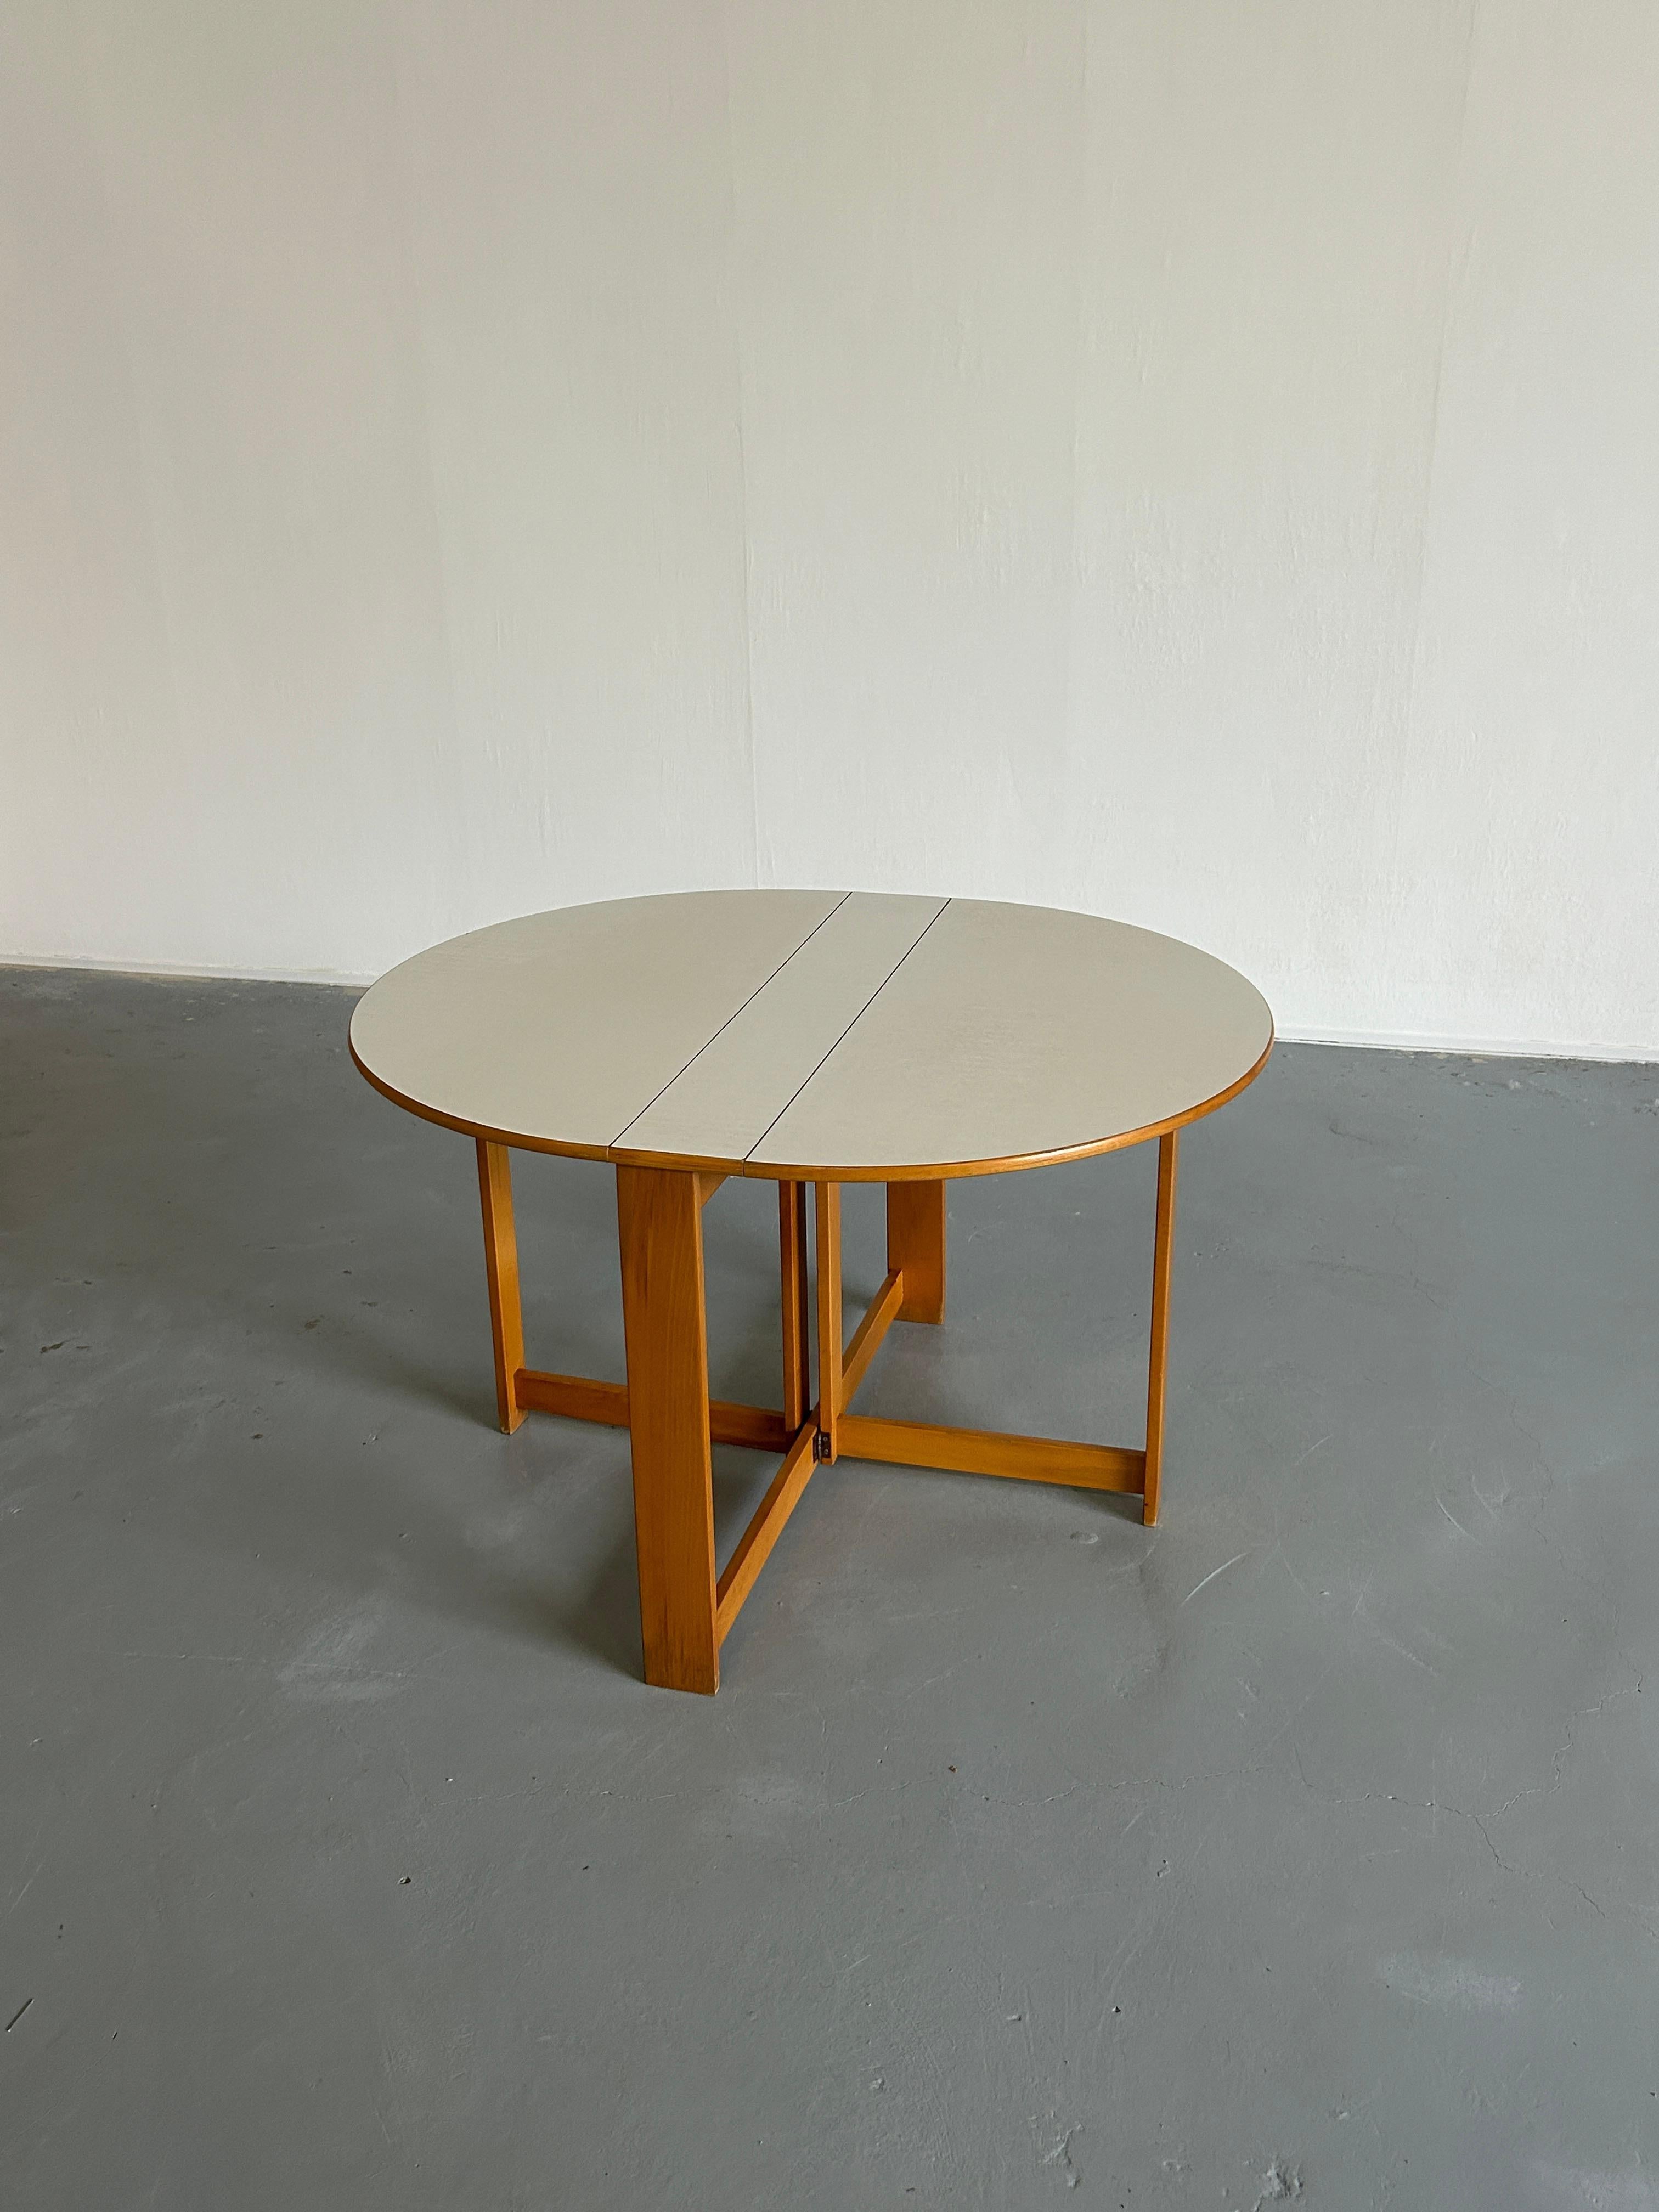 Scandinavian Mid-Century-Modern foldable dining table with side wings. The oval top is made of white formica, typical of the period. The frame is made of oak wood. A modern and functional piece of furniture, perfect for a small room. Can easily seat